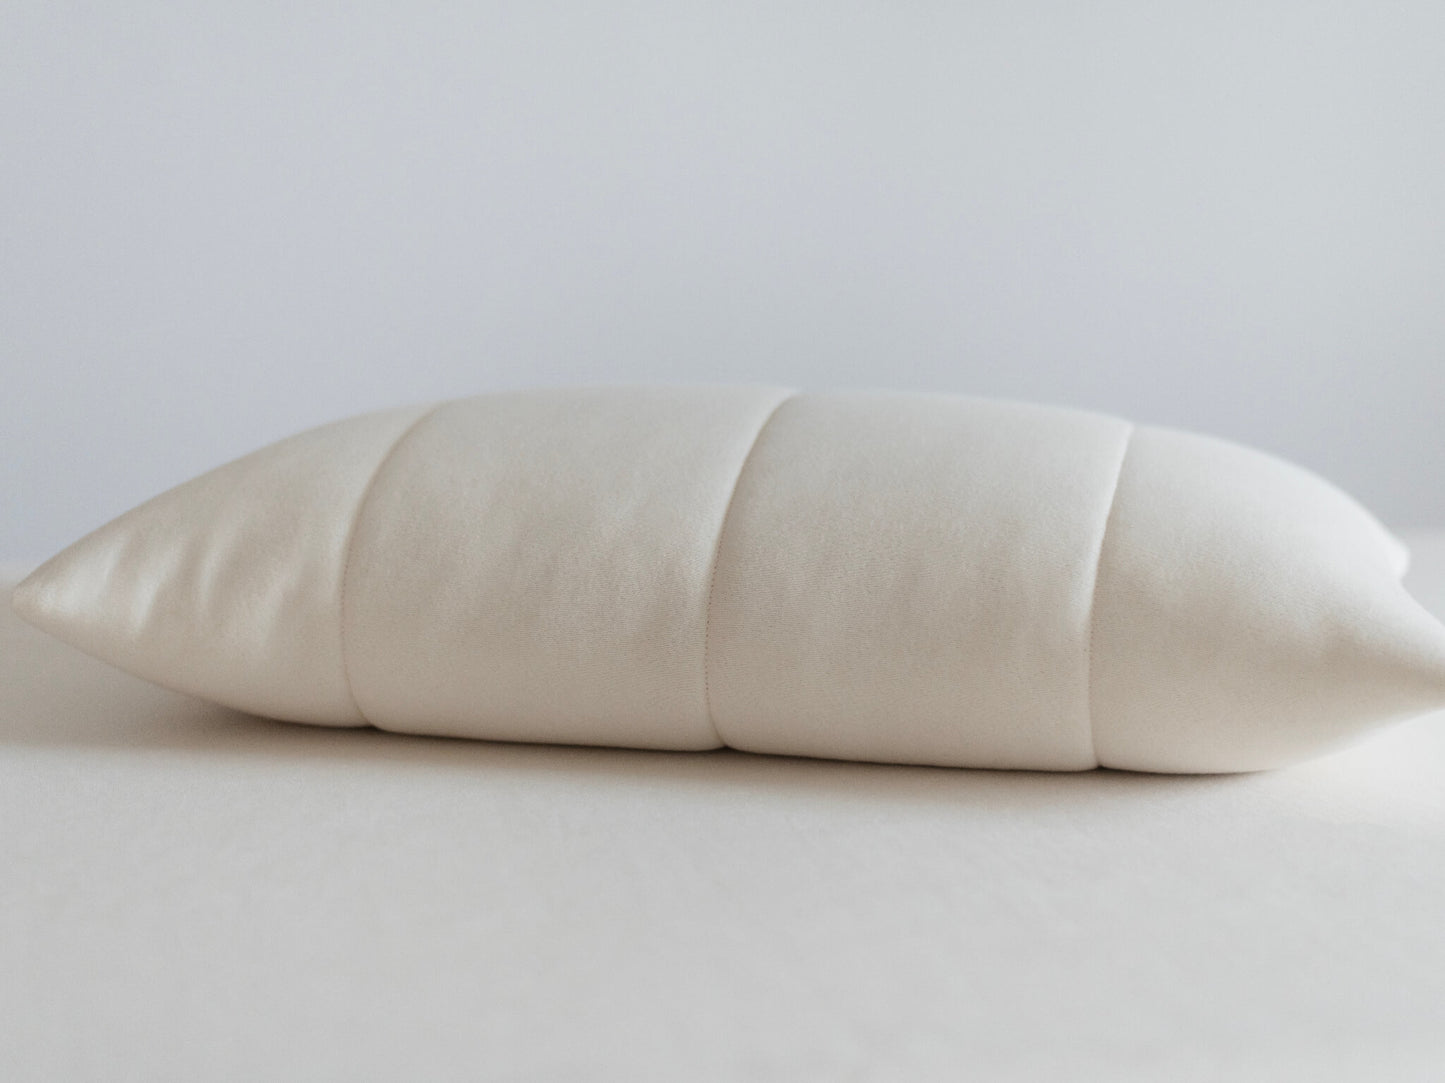 Deluxe organic latex and wool pillow